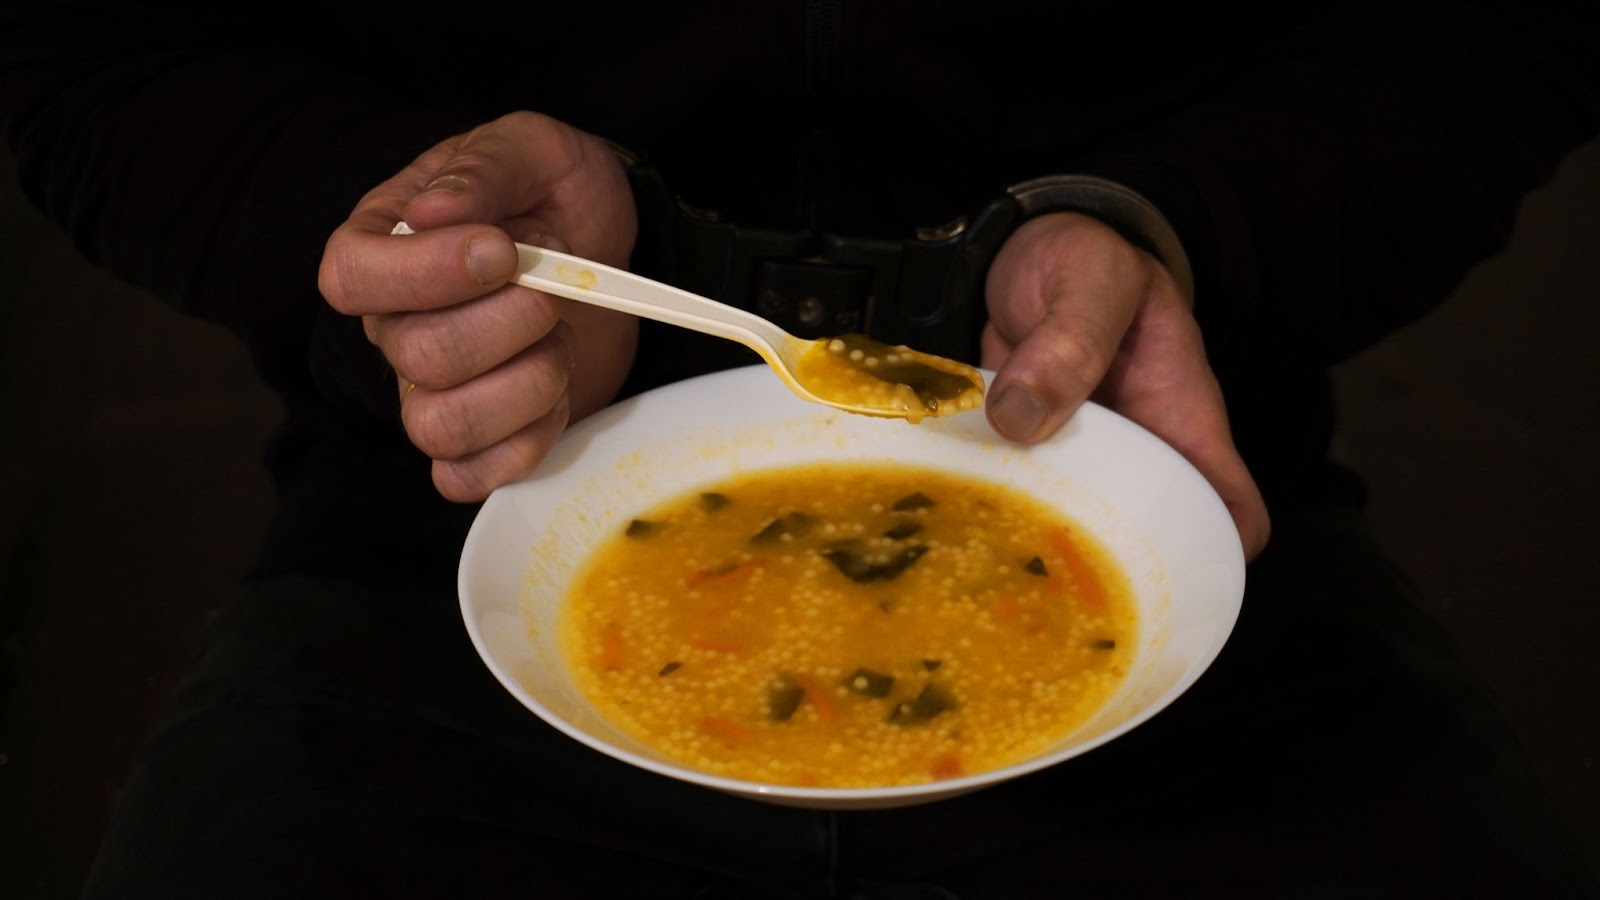 Wall Street Prison Consultants | What Do You Eat In Prison - The Reality of Prison Meals